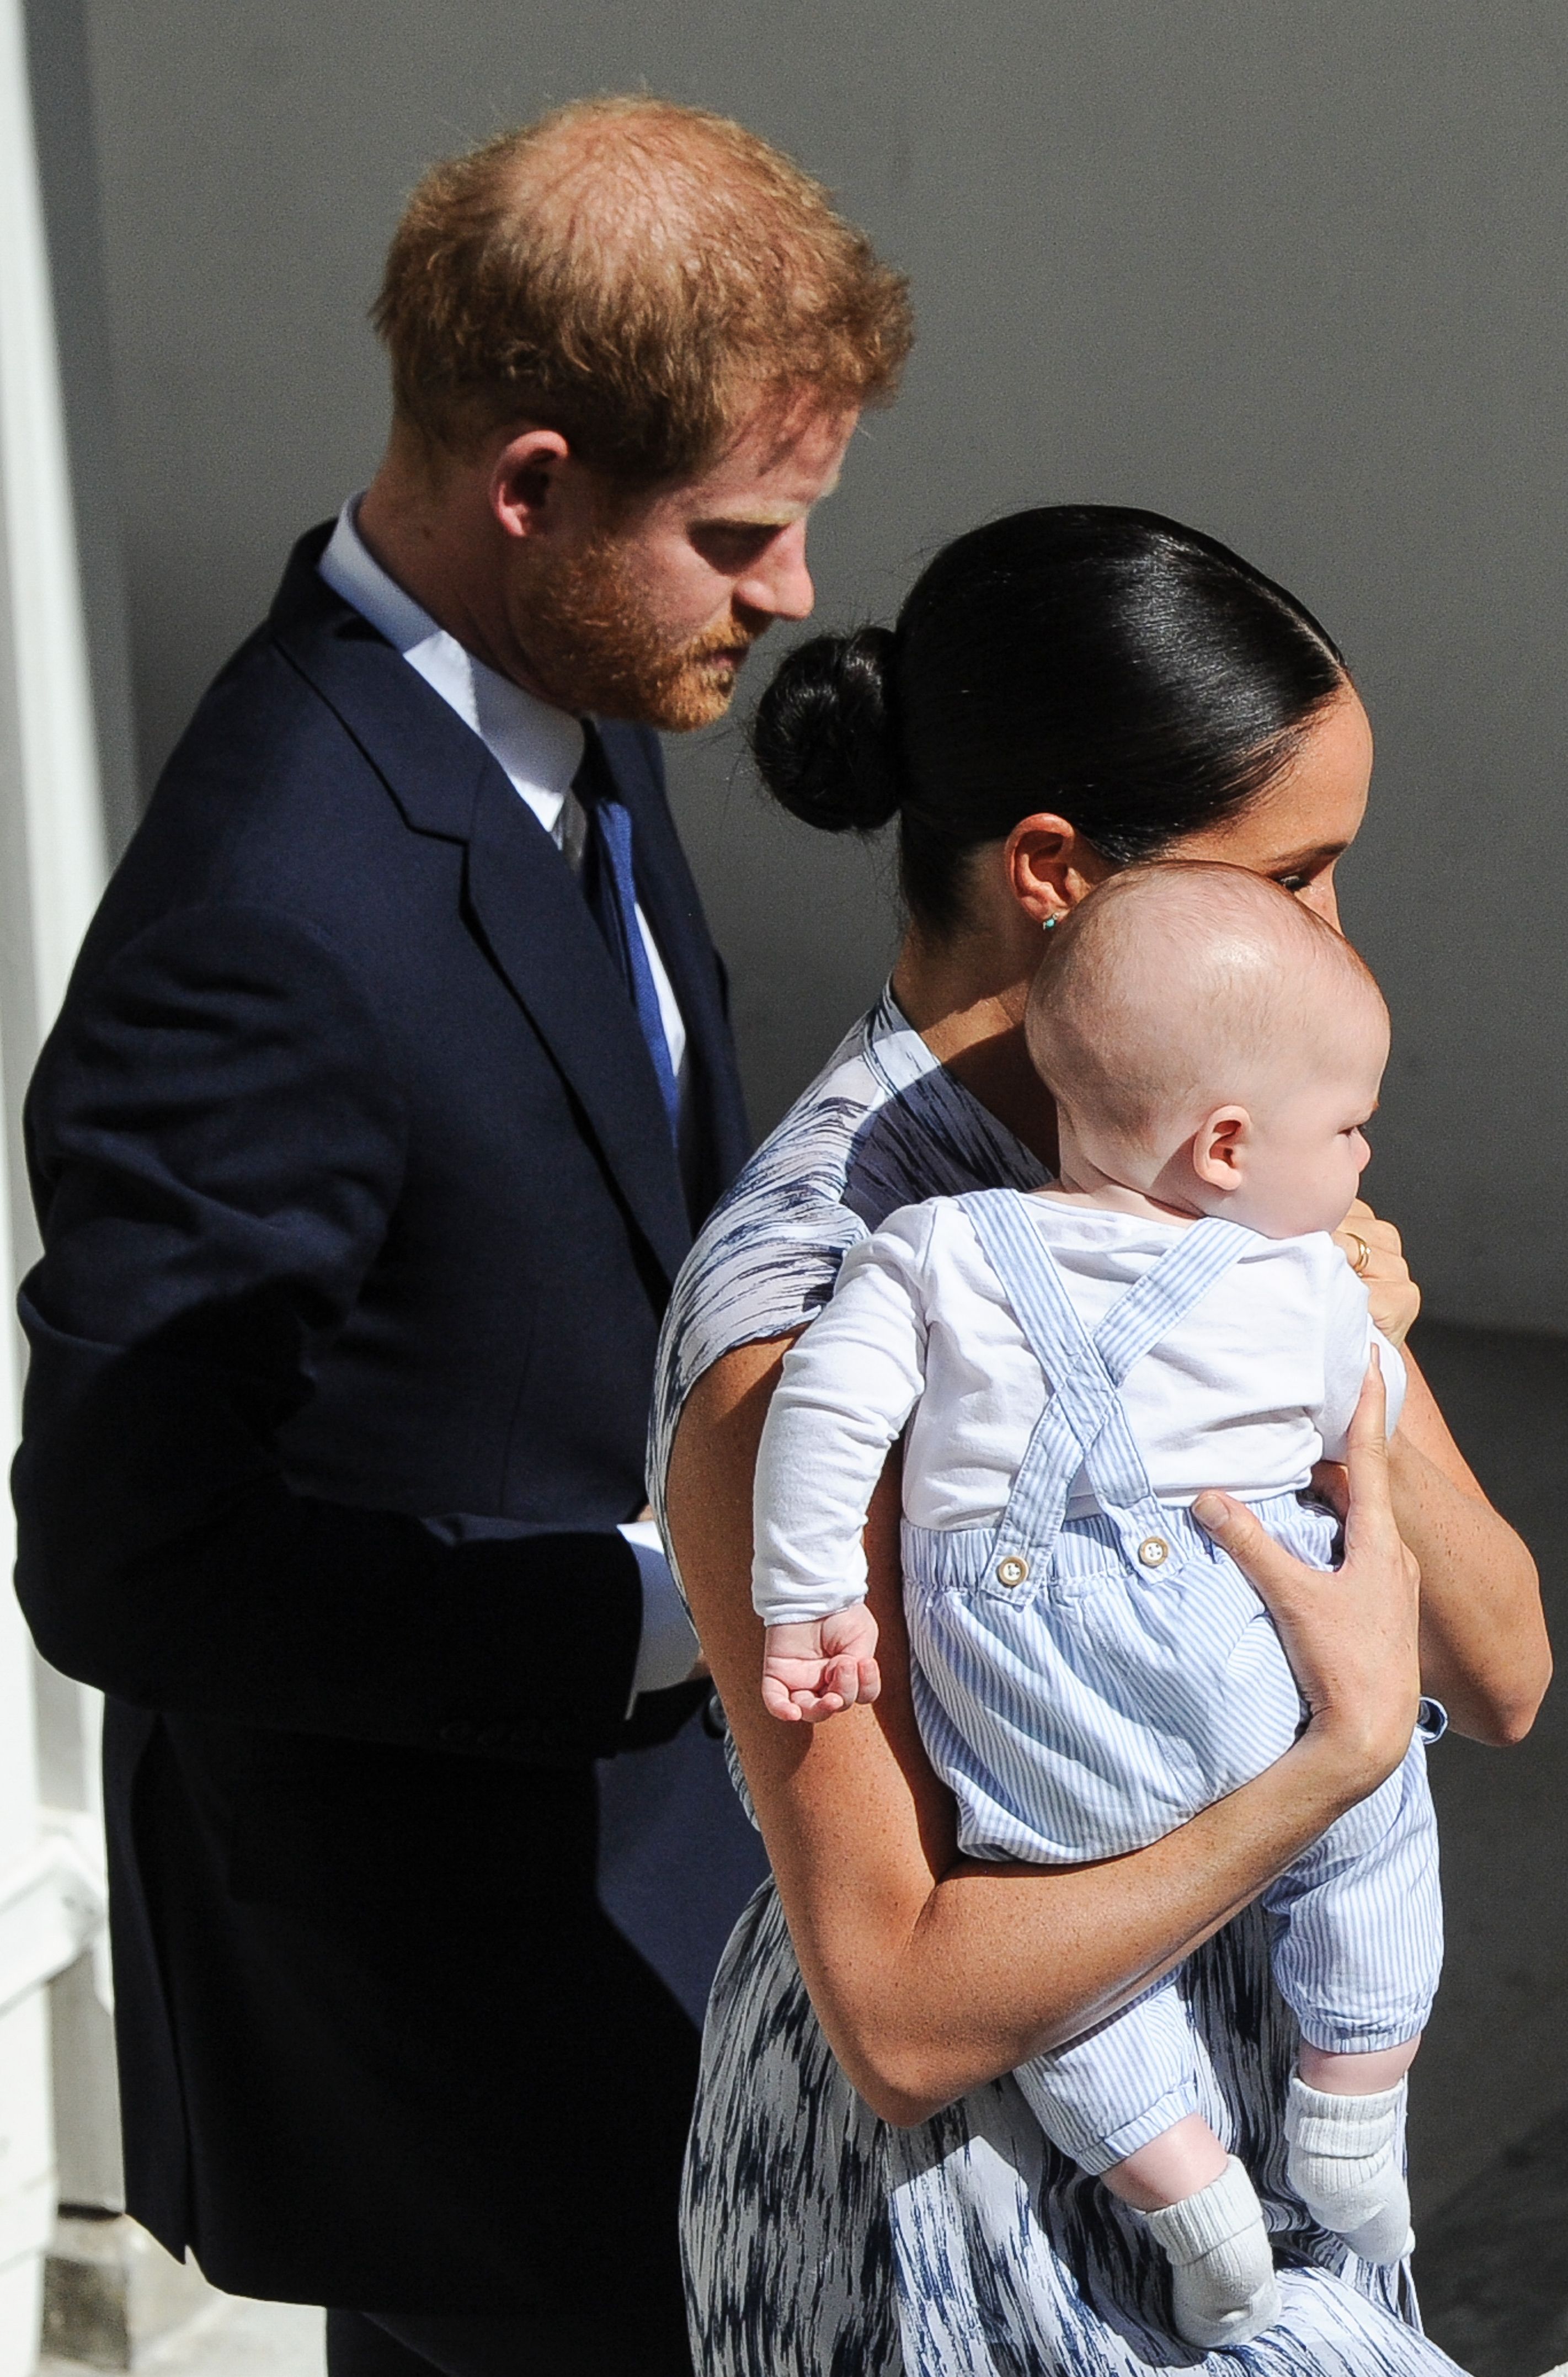 Britain's Duke and Duchess of Sussex, Prince Harry and his wife Meghan hold their baby son Archie as they meet with Archbishop Desmond Tutu and his wife (unseen) at the Tutu Legacy Foundation in Cape Town on September 25, 2019 | Source: Getty Images